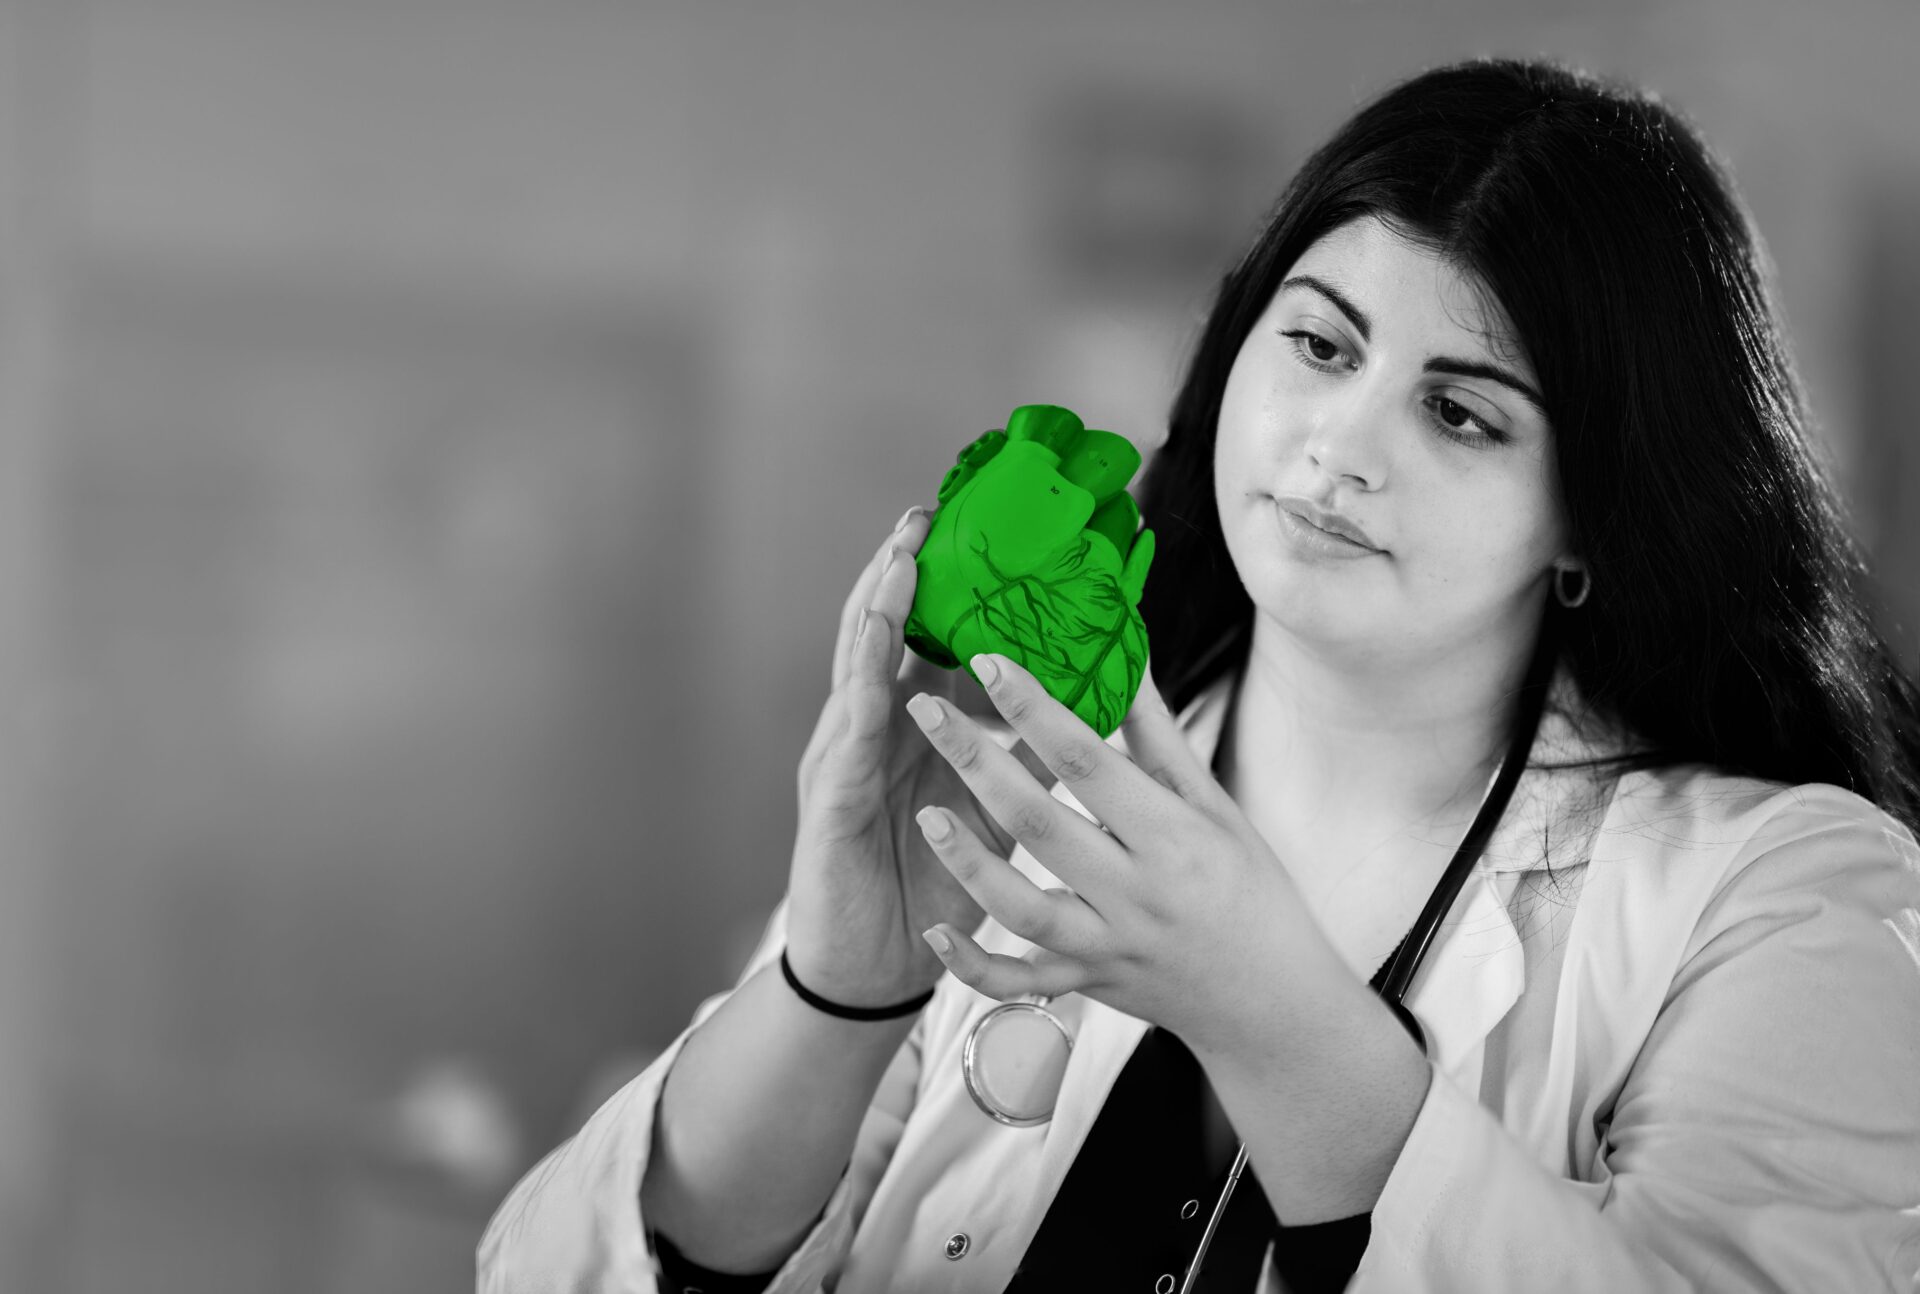 student looking at a green heart